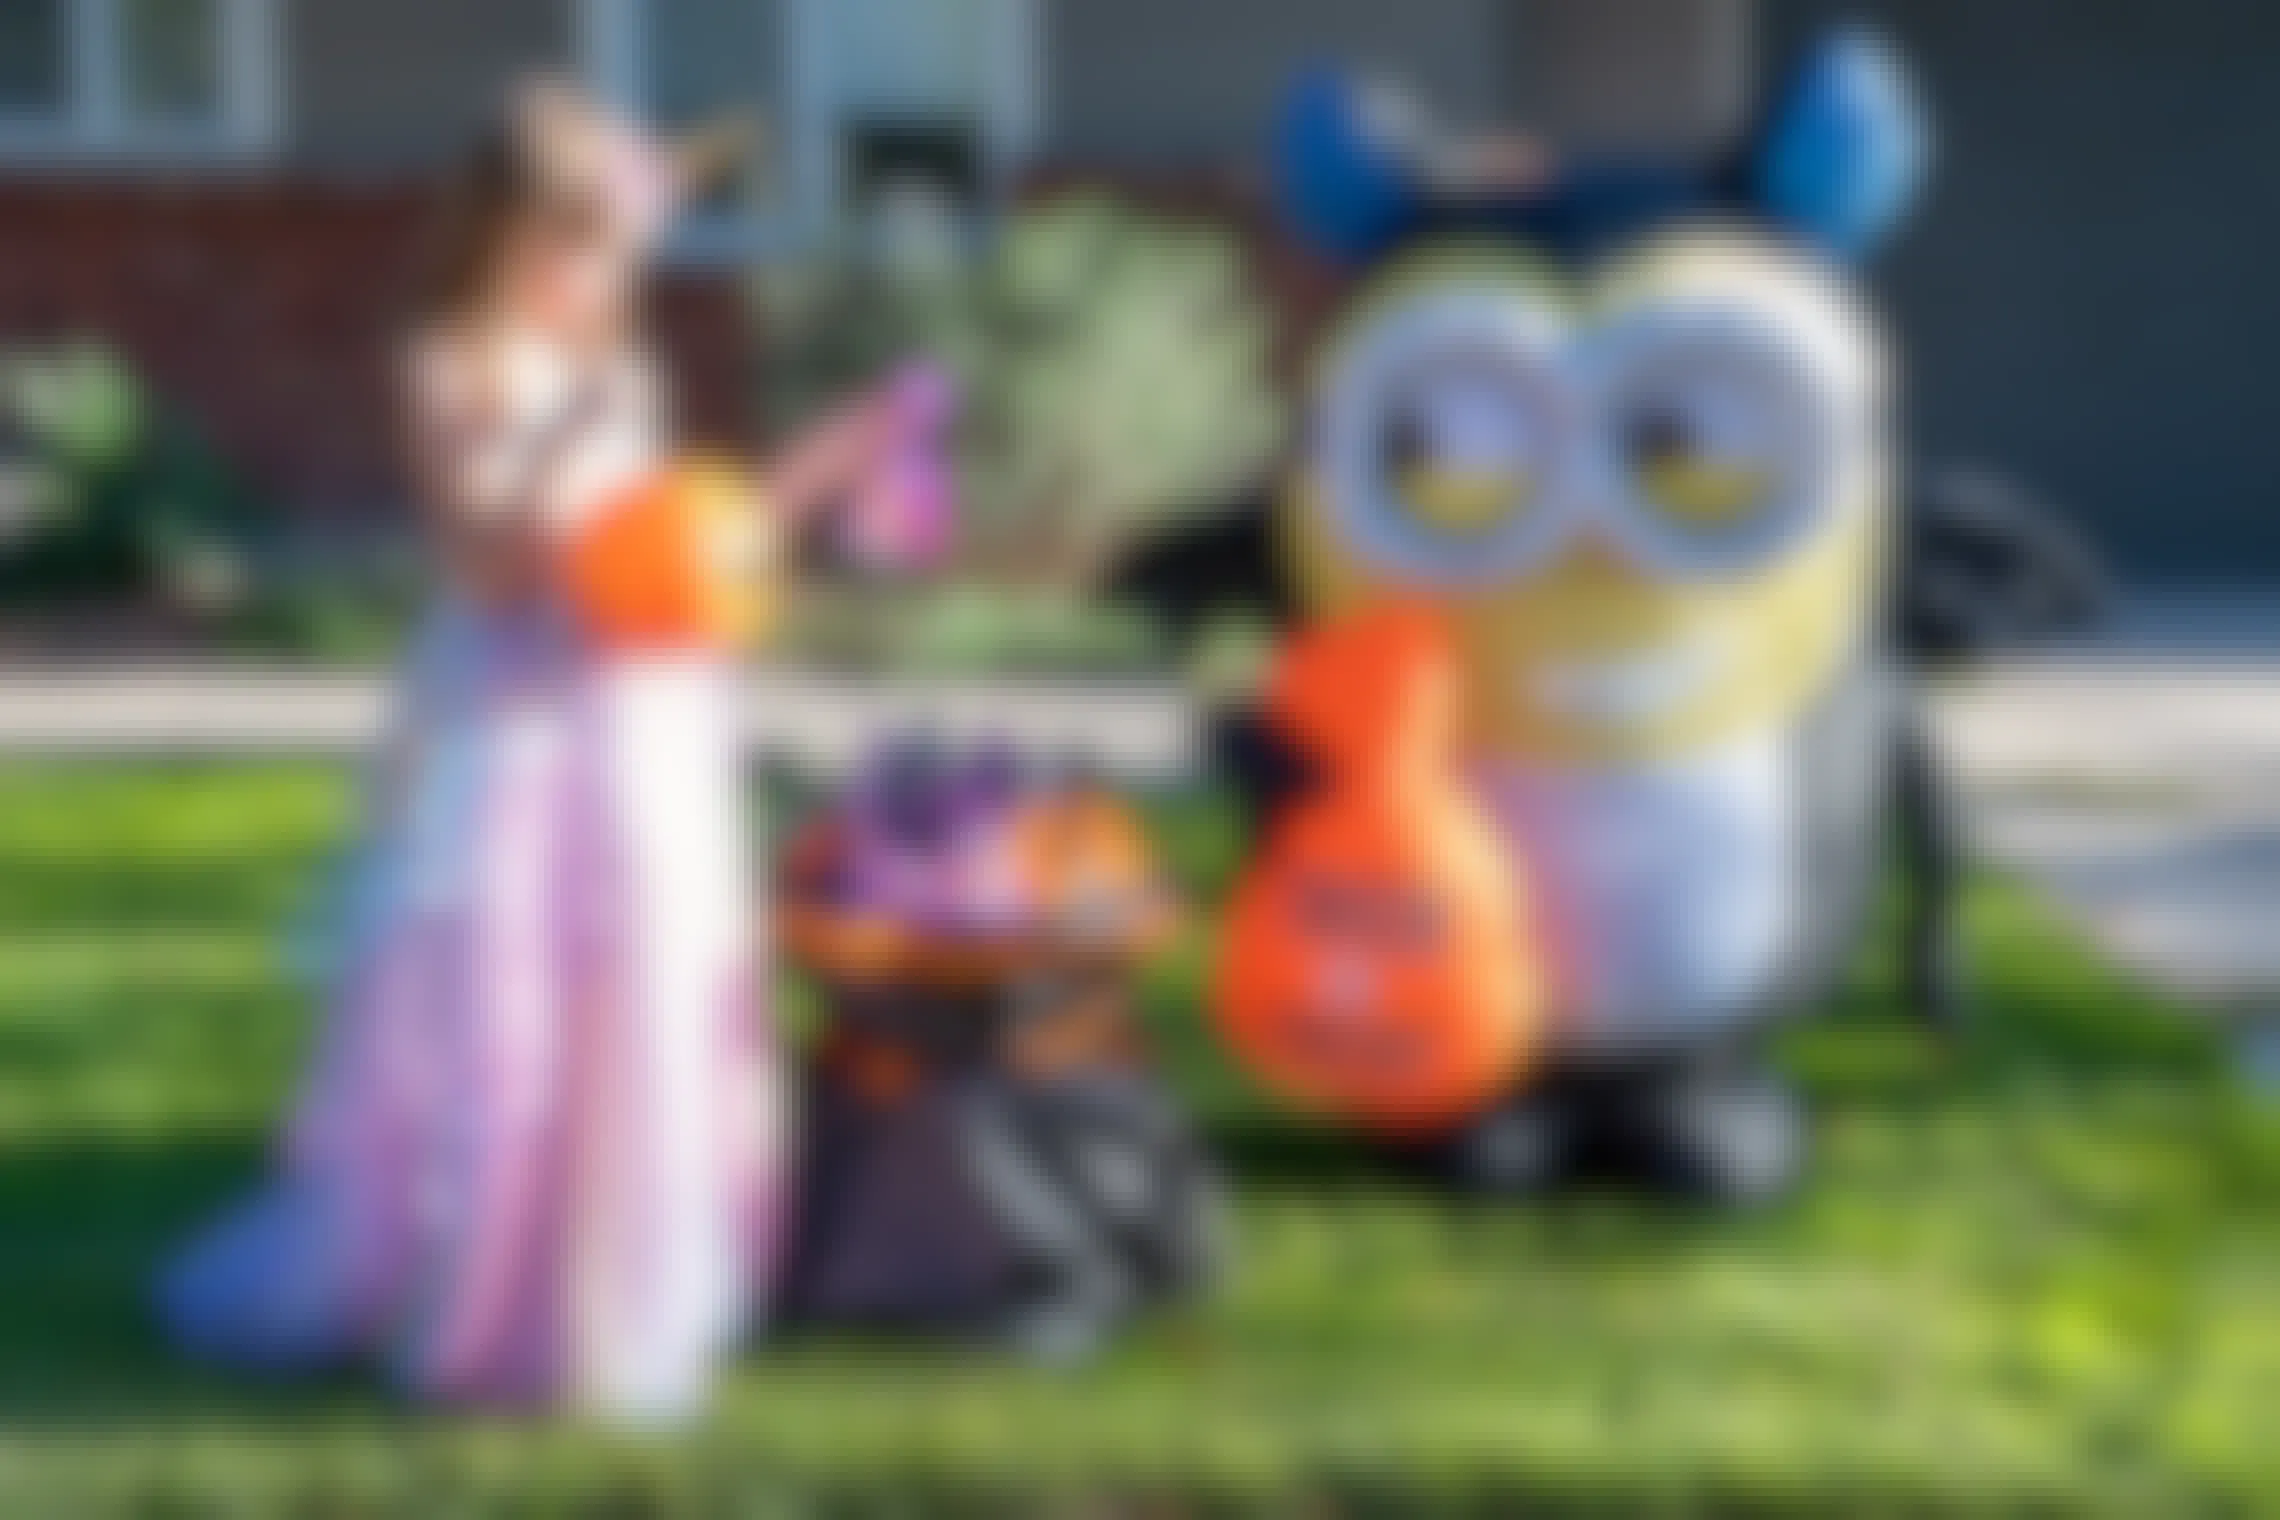 a little girl wearing a halloween costume, picking up a plastic treat bag from a table next to an inflatable minion lawn decoration.